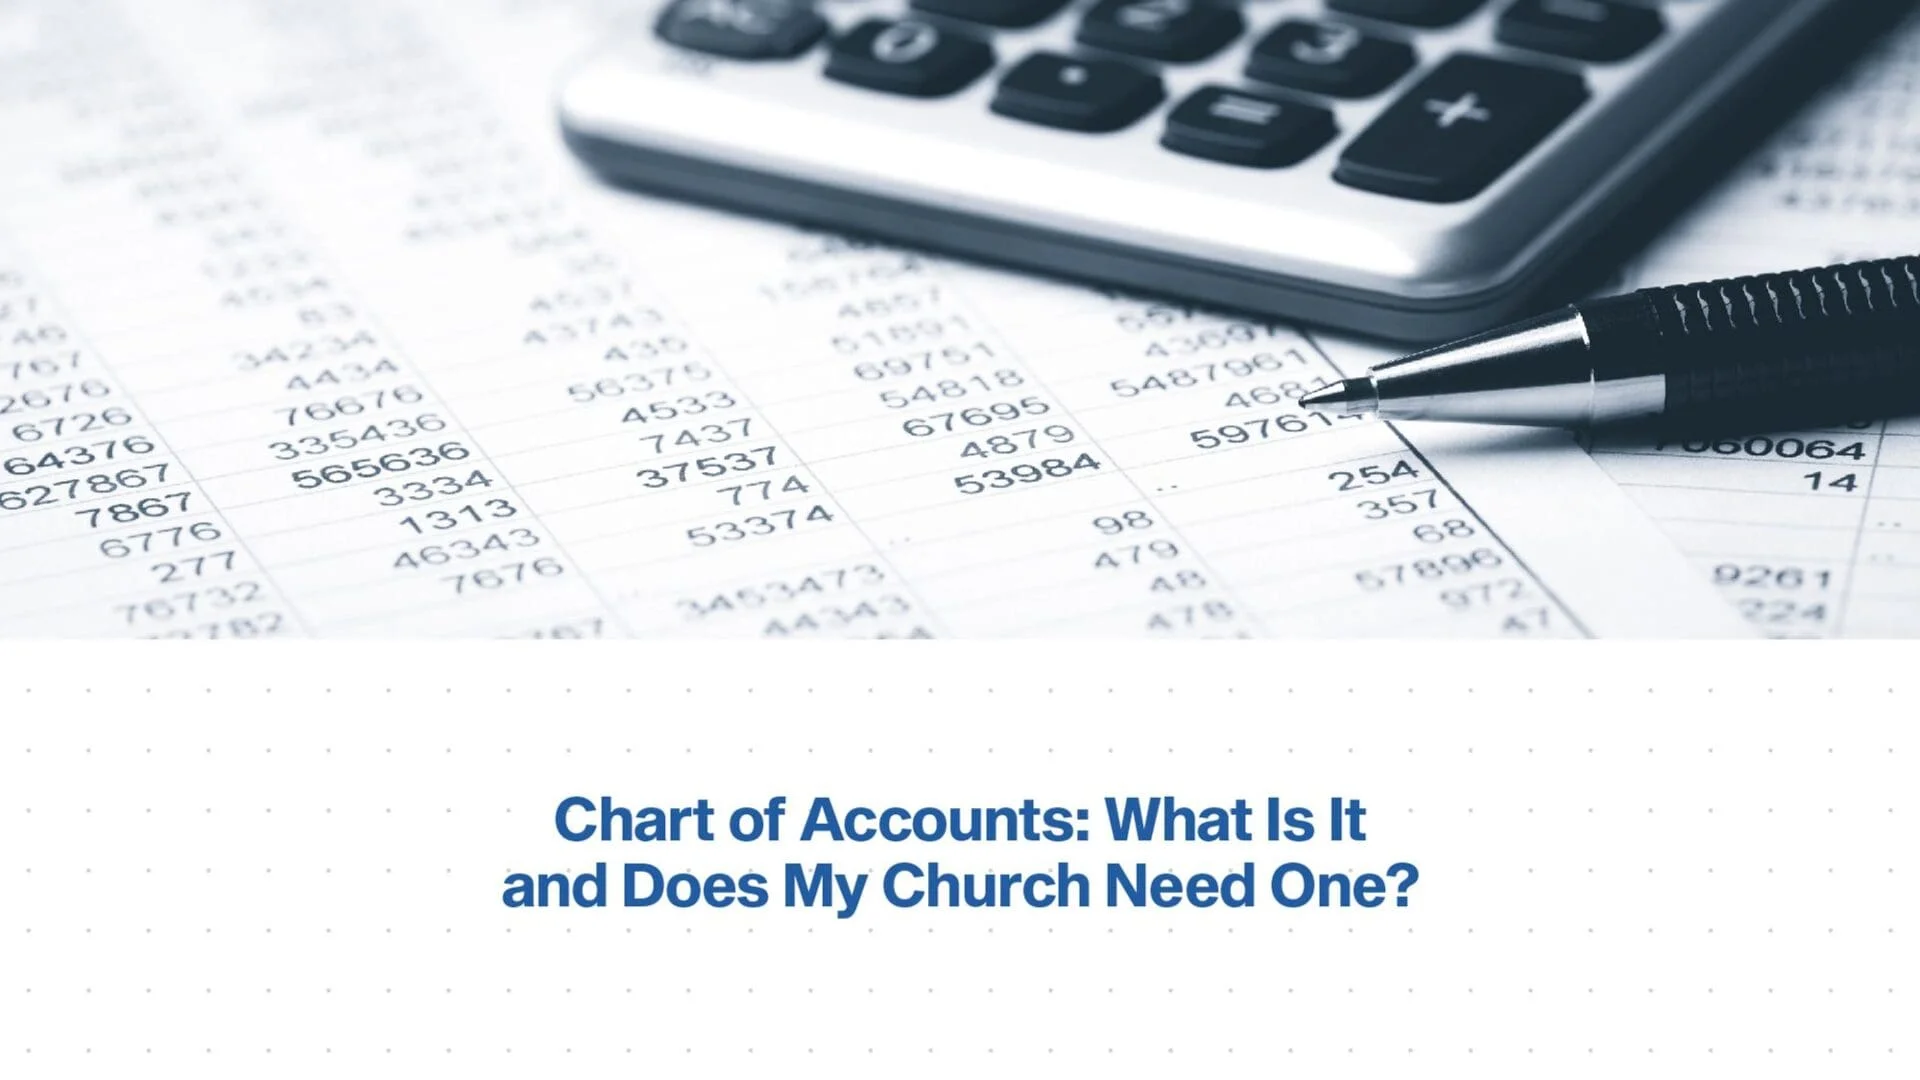 What Is a Chart of Accounts? How Do I Know If My Church Needs One?